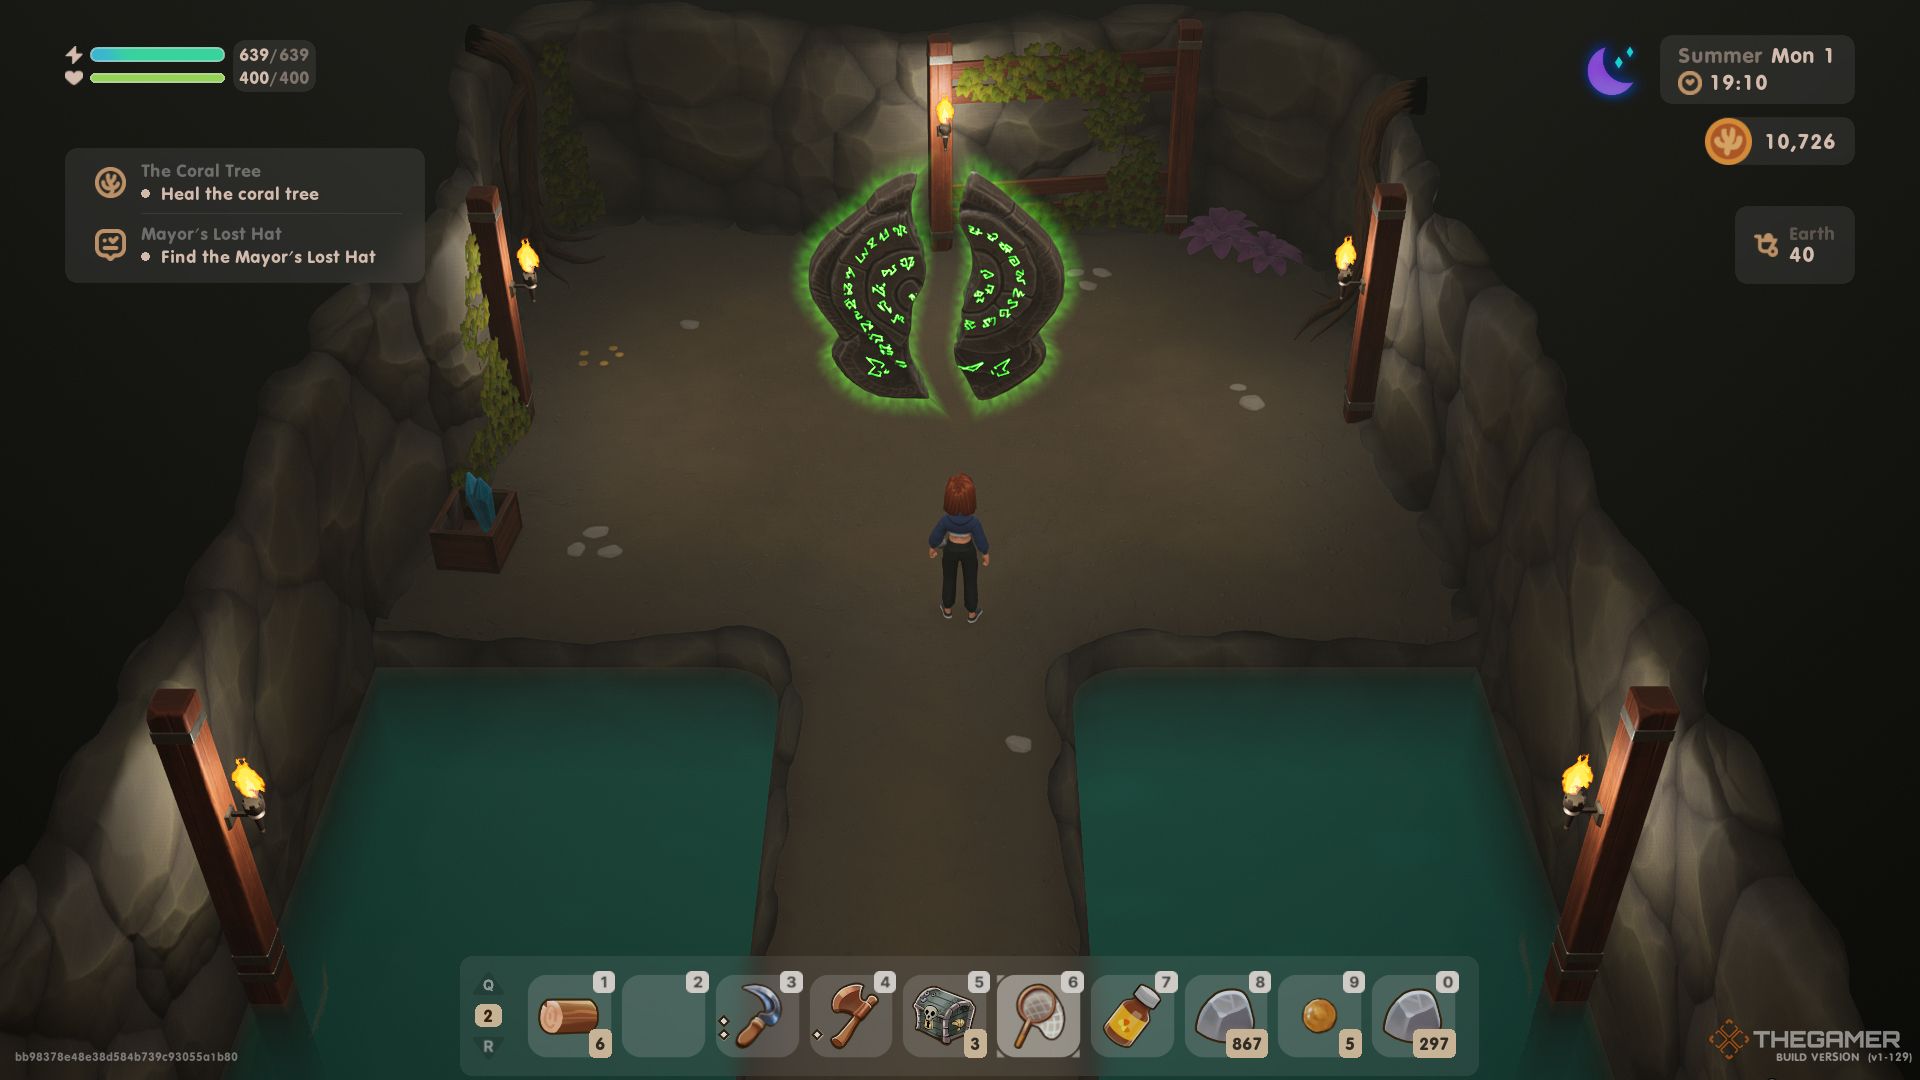 Breaking the cursed tablet in the earth mine in Coral Island